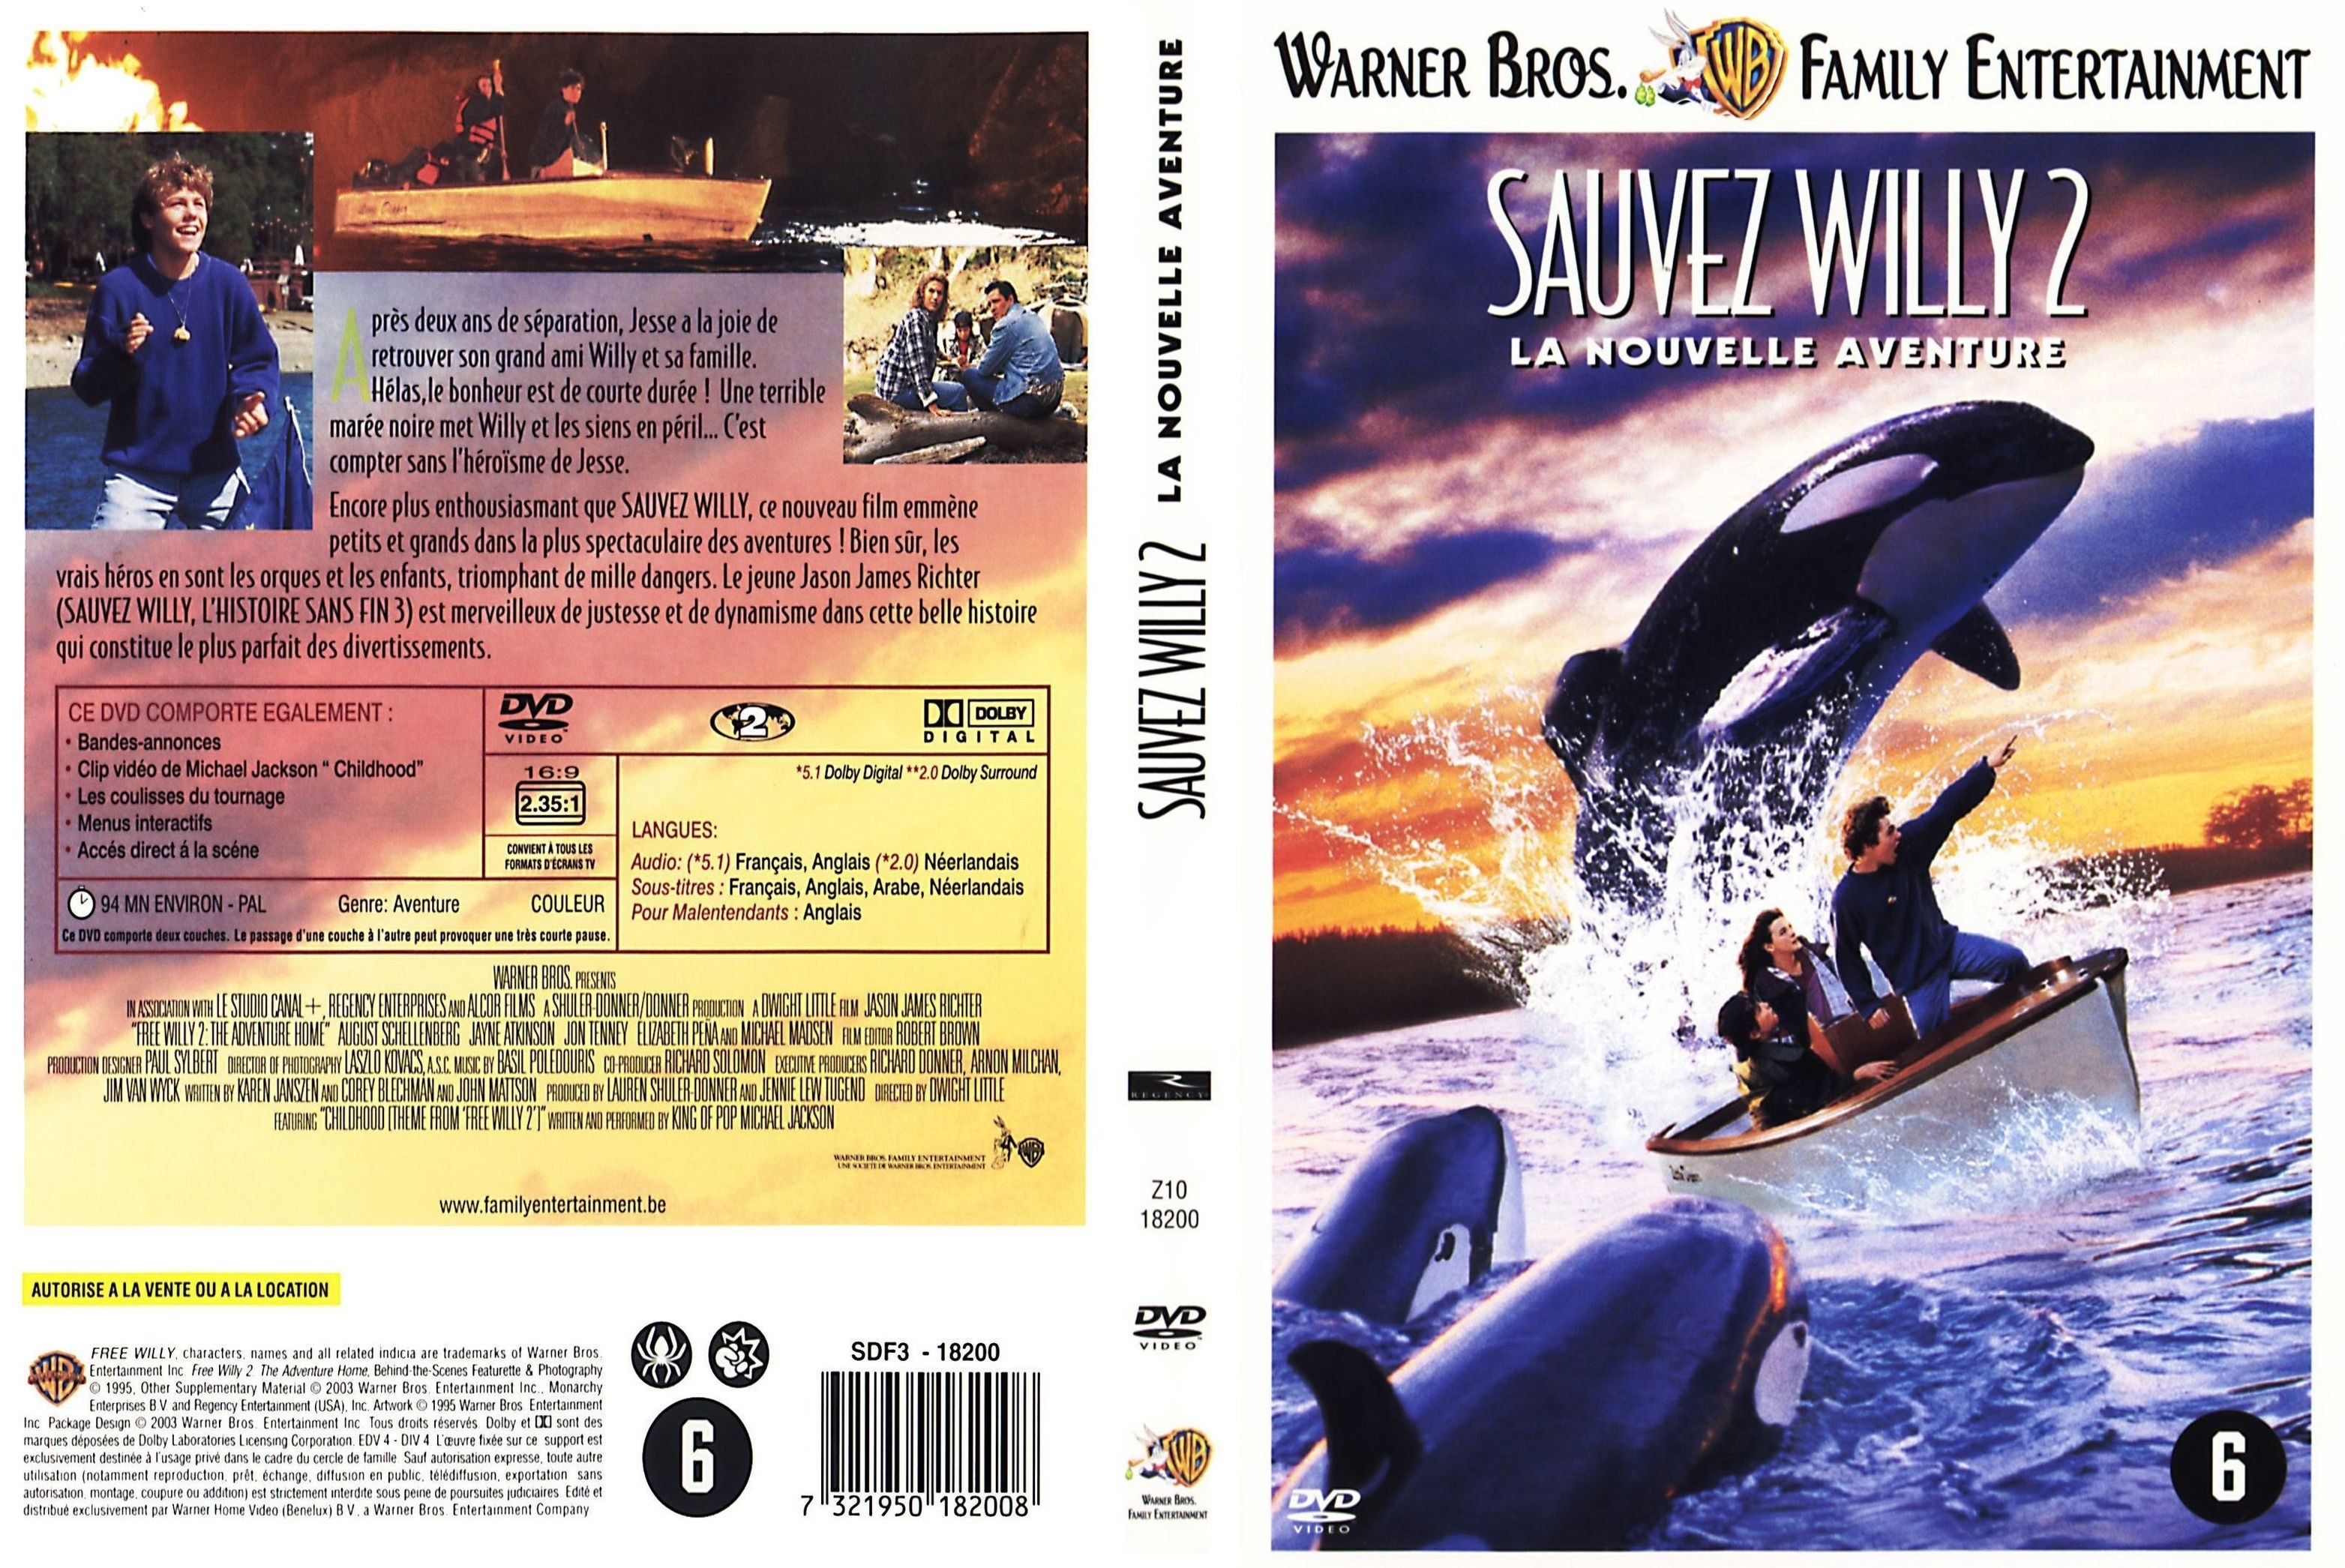 Jaquette DVD Sauver Willy 2